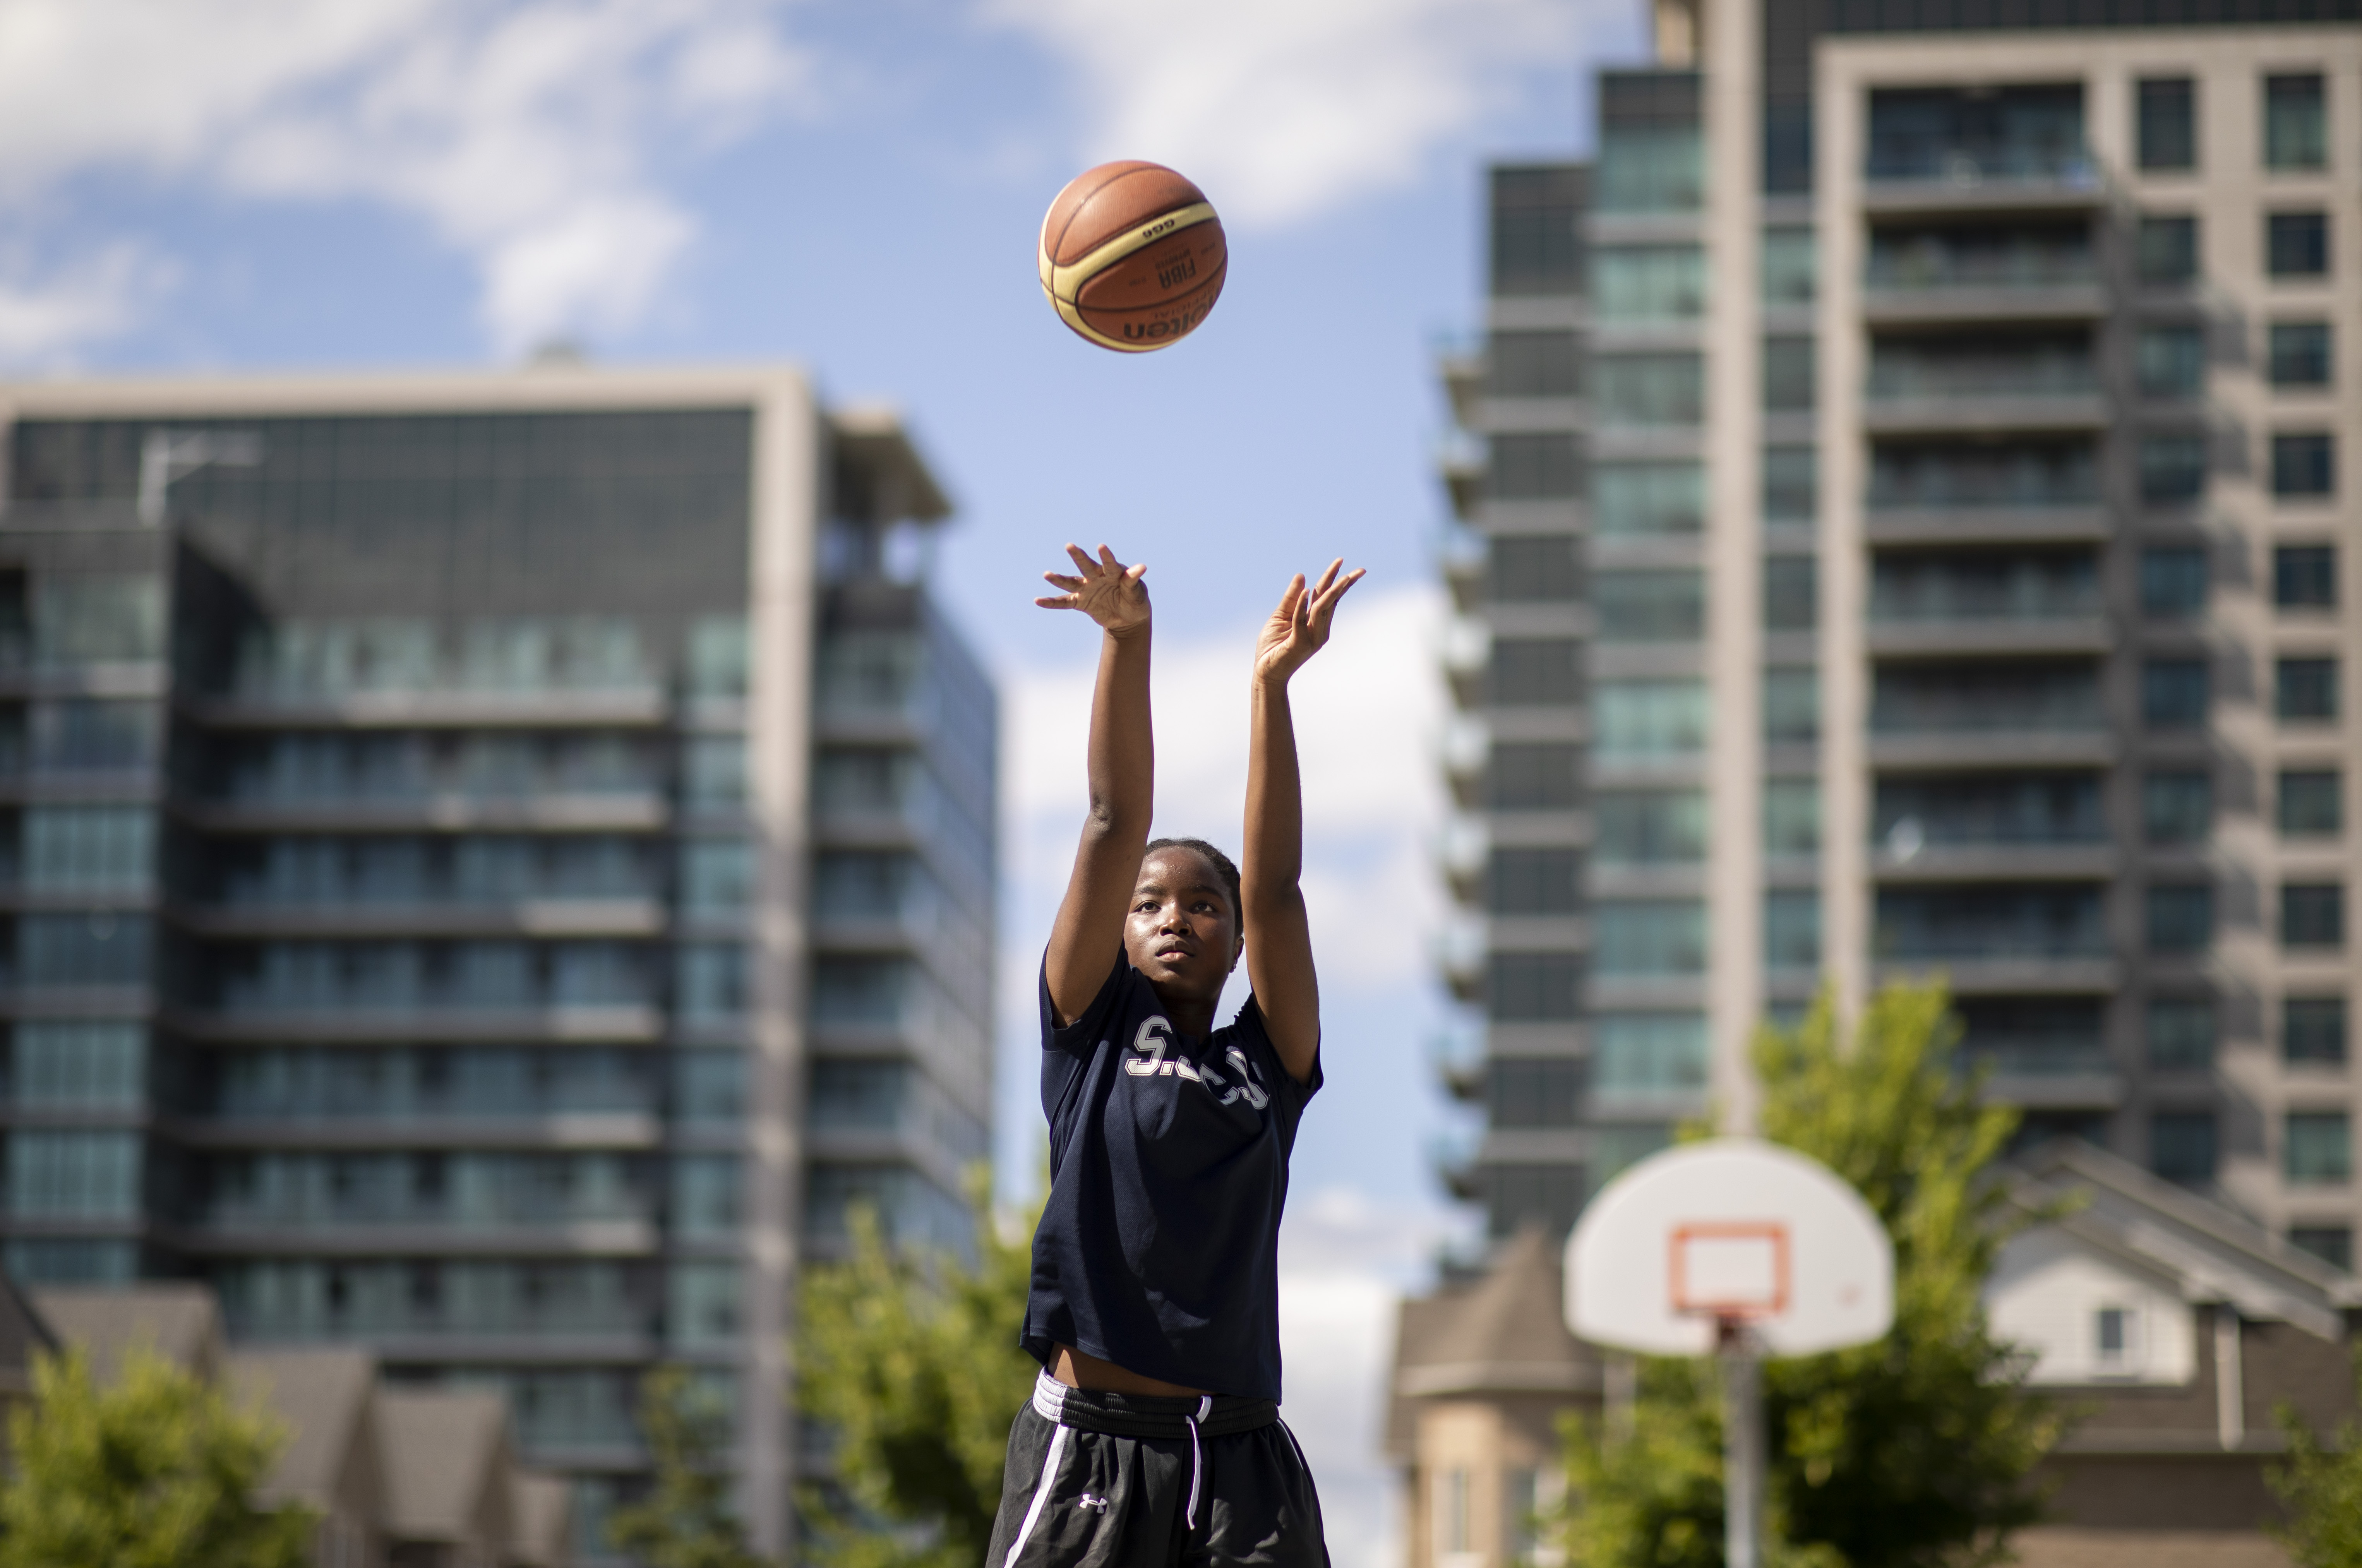 “I just want to keep improving my game, keep reinventing myself in basketball, and I feel like she can really help me with that,” says Nakeisha Ekwandja of U of T basketball coach Michèle Bélanger (photo by Nick Iwanyshyn)